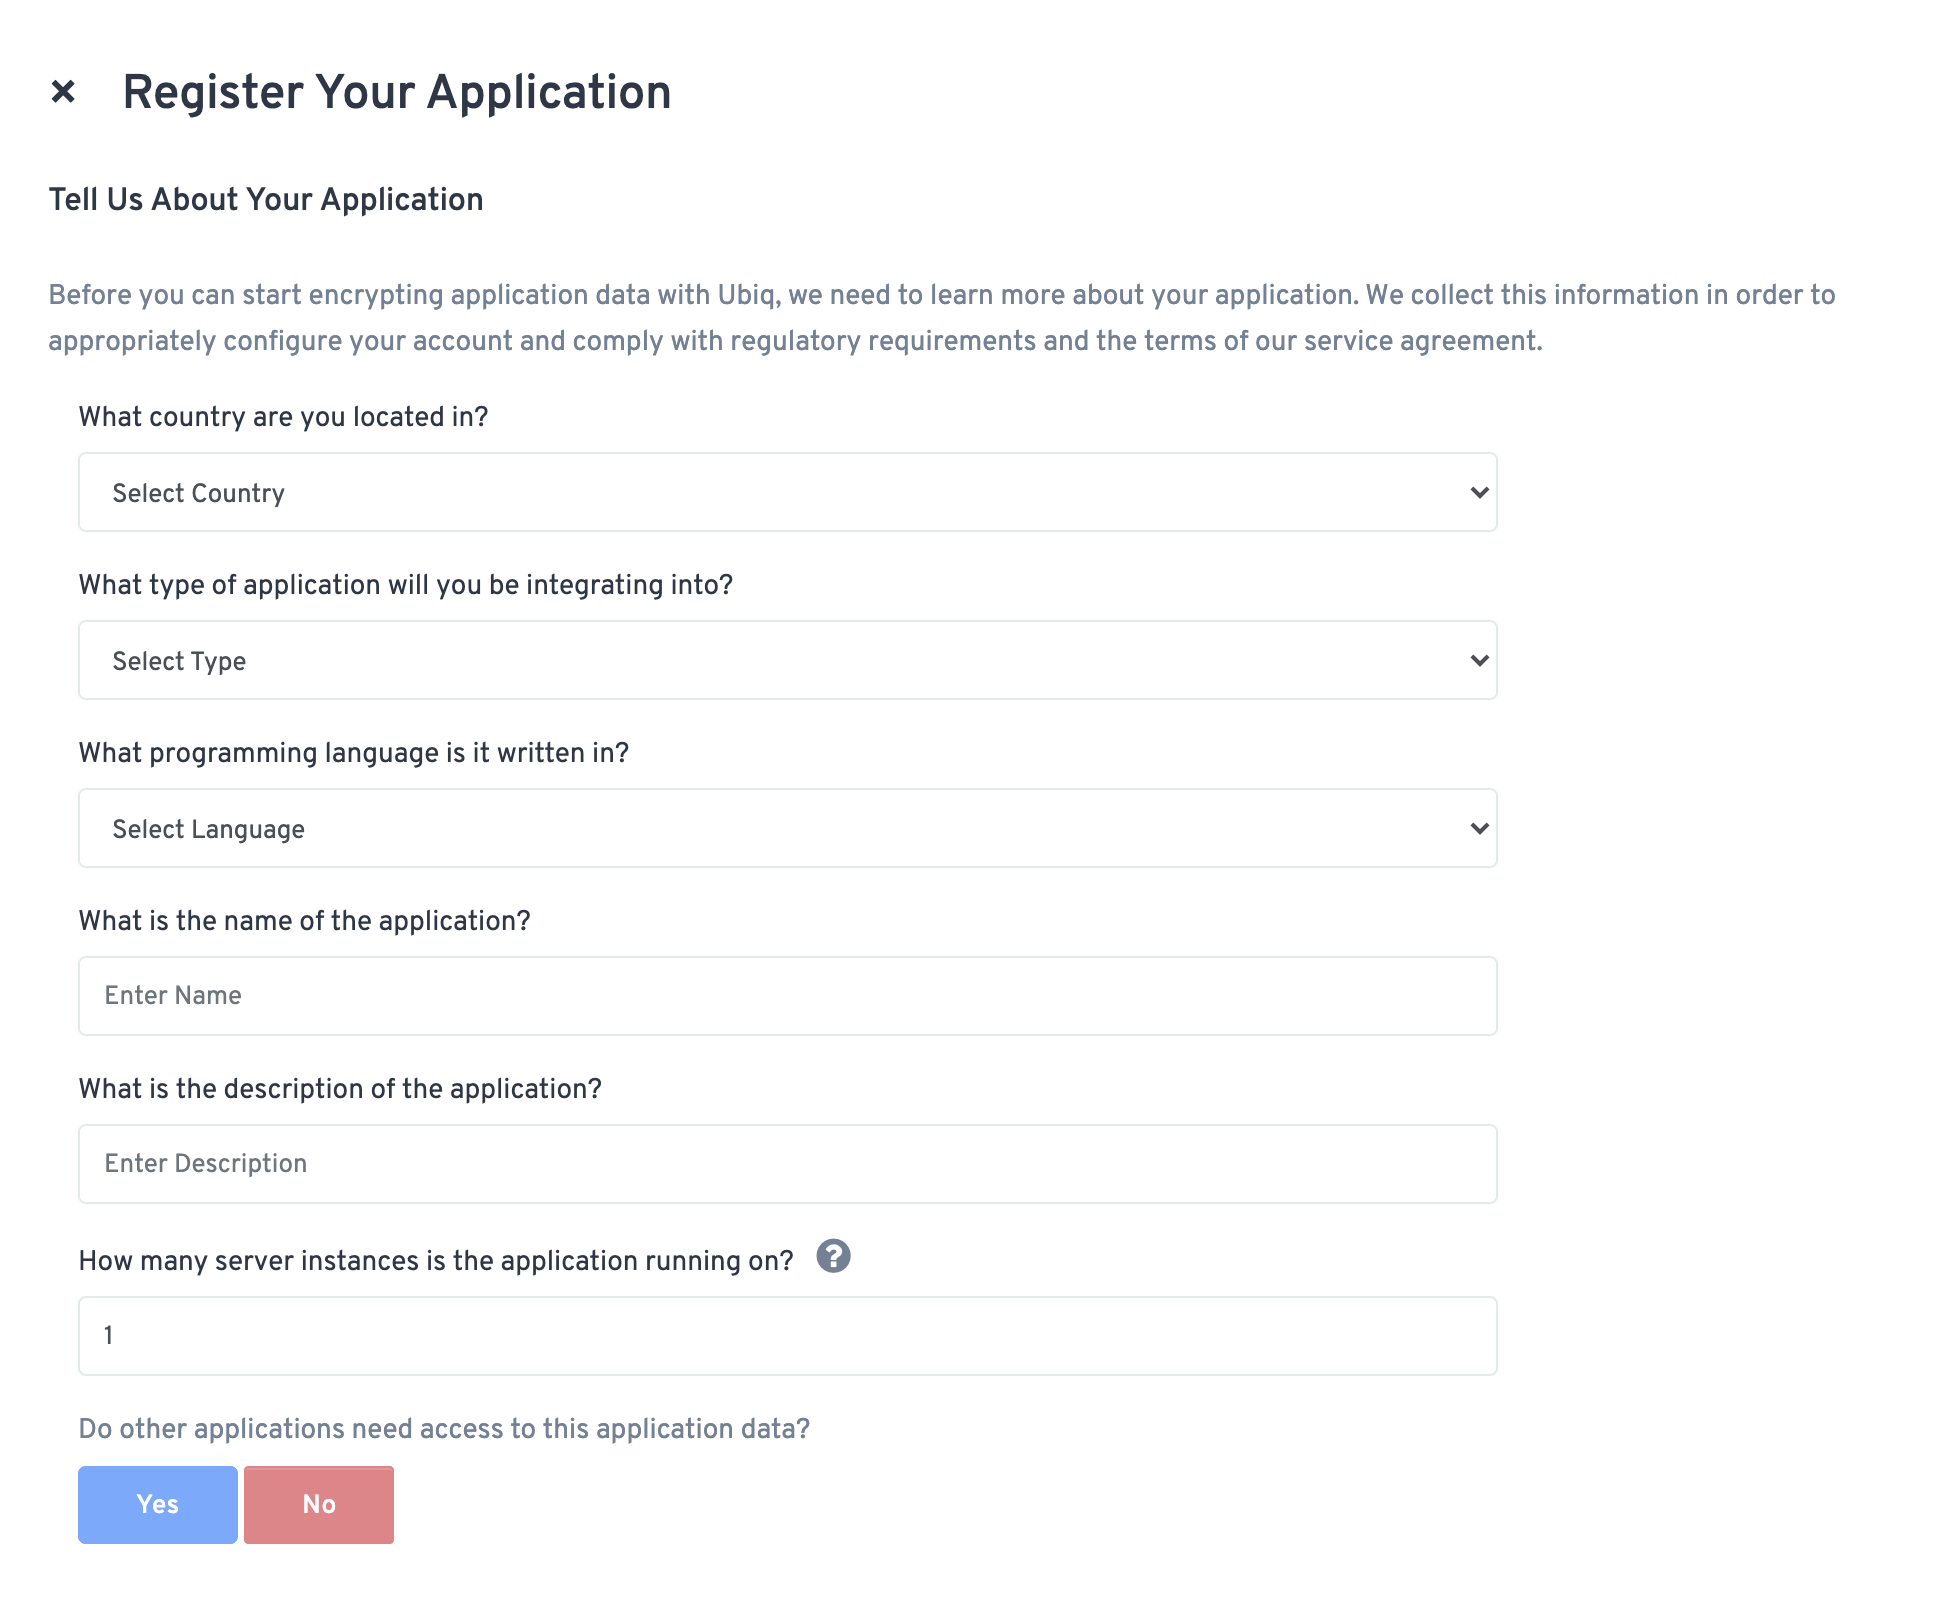 The Ubiq Dashboard allows you to register and manage all your applications for your projects.